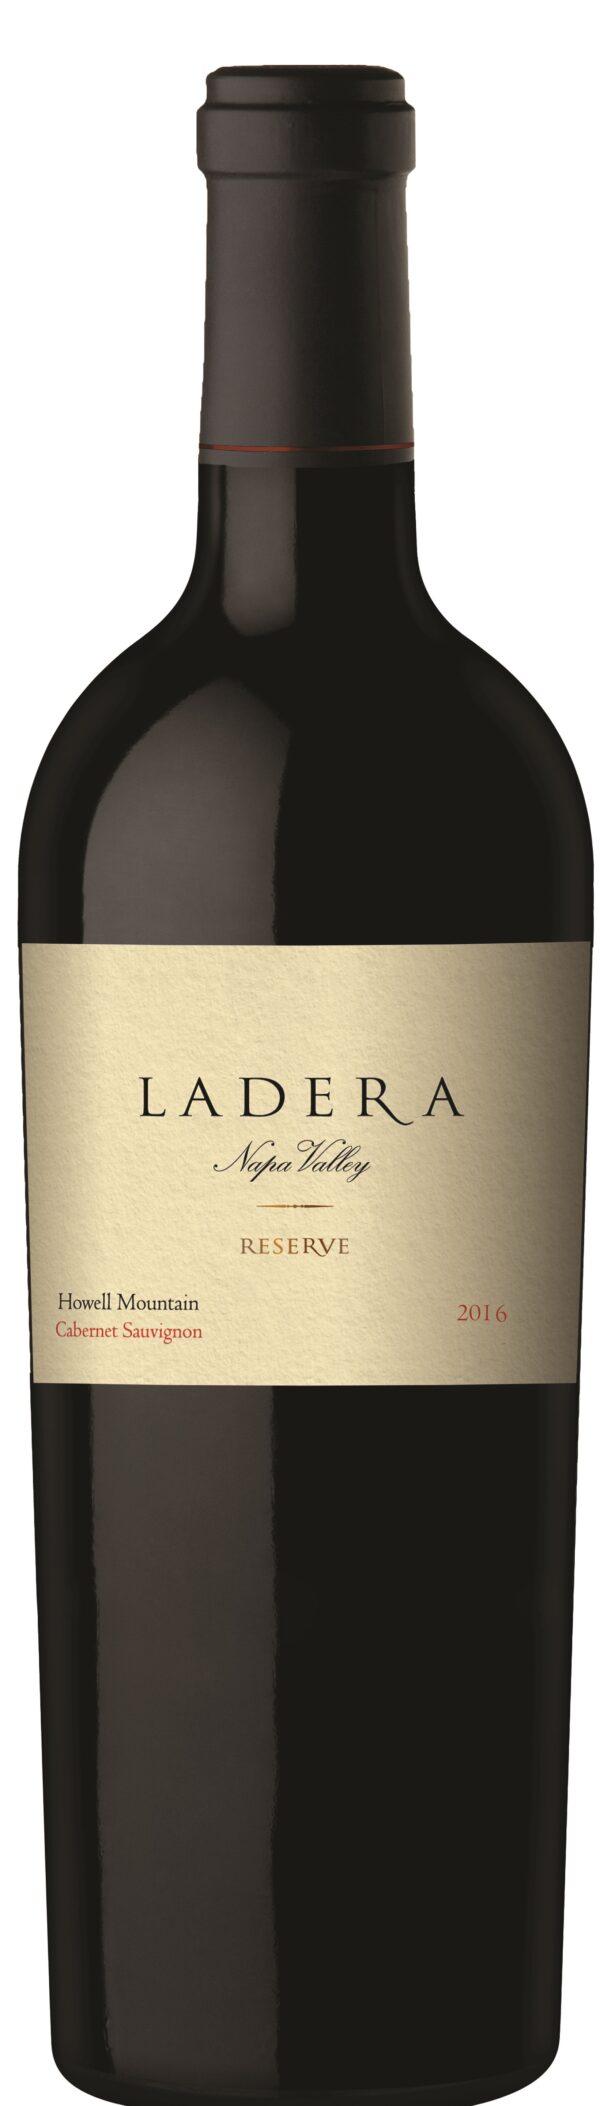  Ladera 2016 Cabernet Sauvignon Reserve, Howell Mountain. (Courtesy of Ladera Vineyards)